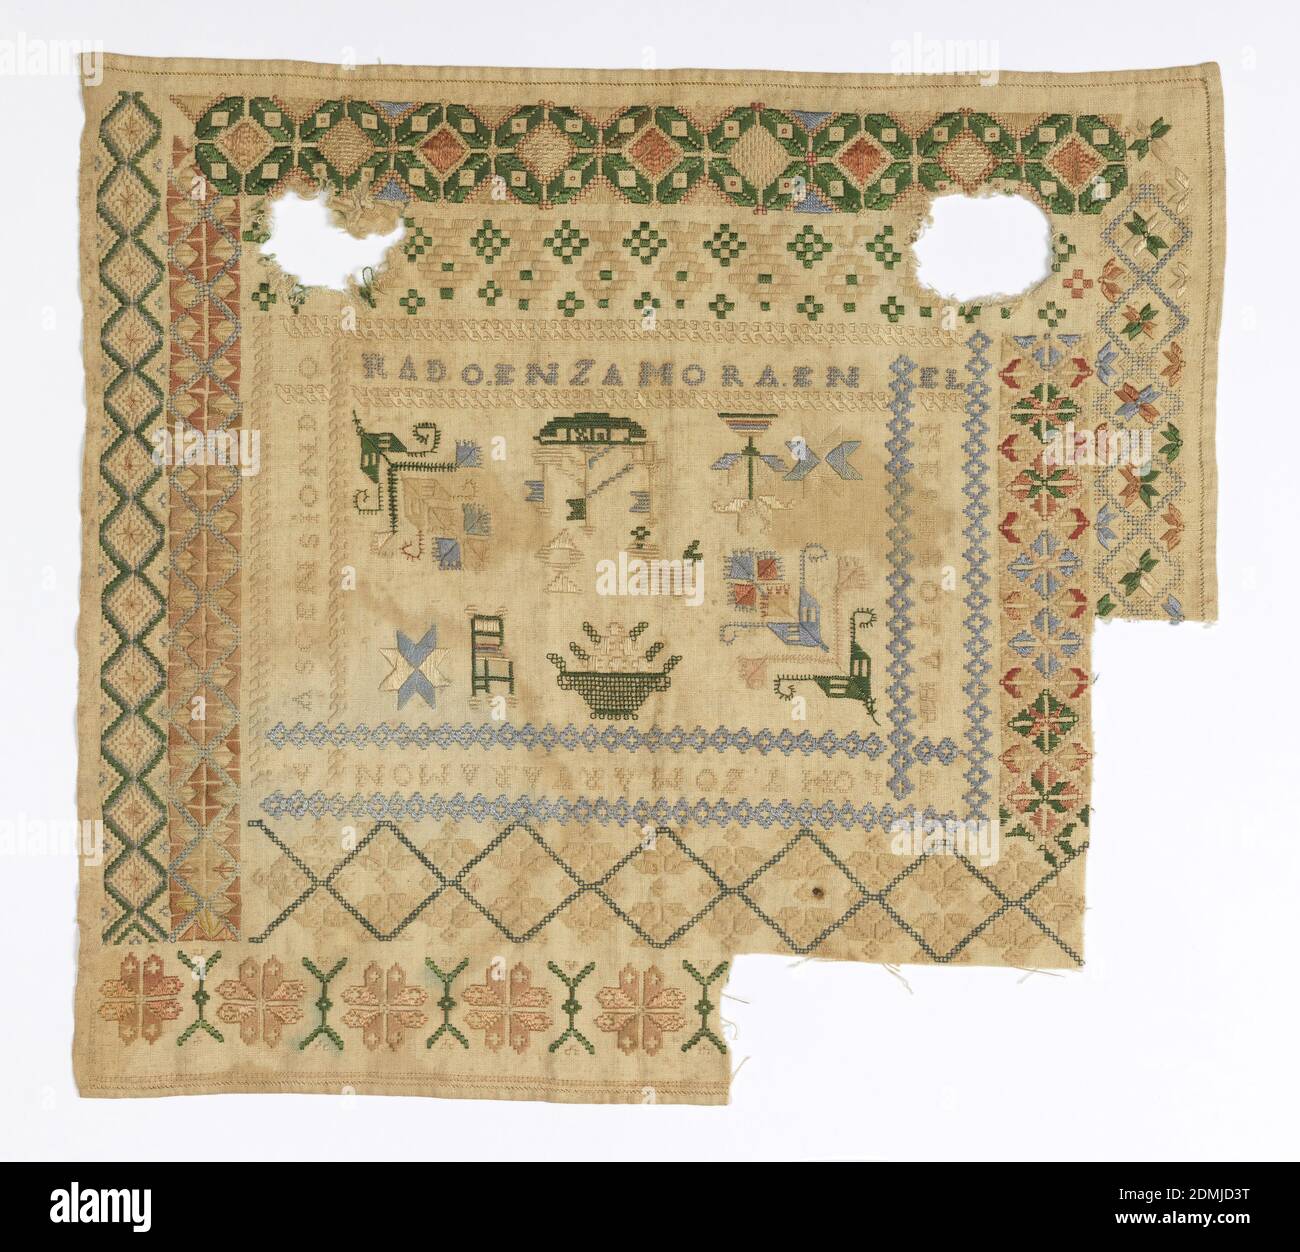 Sampler, Medium: silk embroidery on linen foundation Technique: embroidered, Square sampler with two large circular holes and outer borders cut away in lower right corner. Center field with spot motifs surrounded by inscription bands and geometric borders. Inscription reads: 'Lo hyzo Marya Ramona Ascension Dorado en Zamora en el mes de otubre' or 'Made by Marya Ramona Ascension Dorado in Zamora in the month of October.', Zamora, Spain, 19th century, embroidery & stitching, Sampler Stock Photo